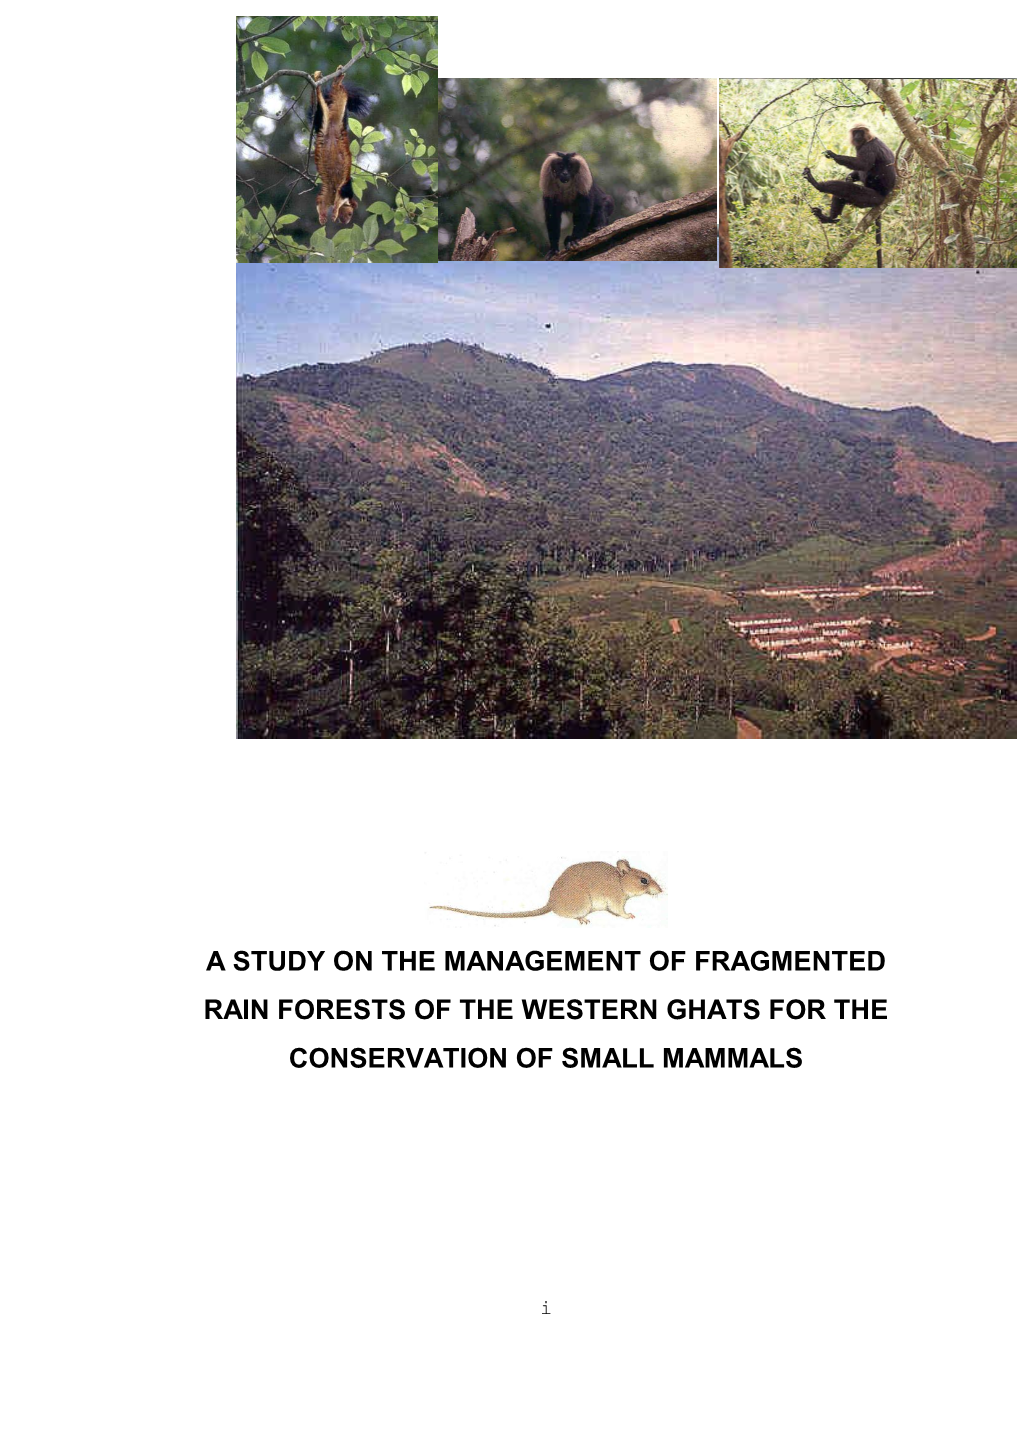 A Study on the Management of Fragmented Rain Forests of the Western Ghats for the Conservation of Small Mammals